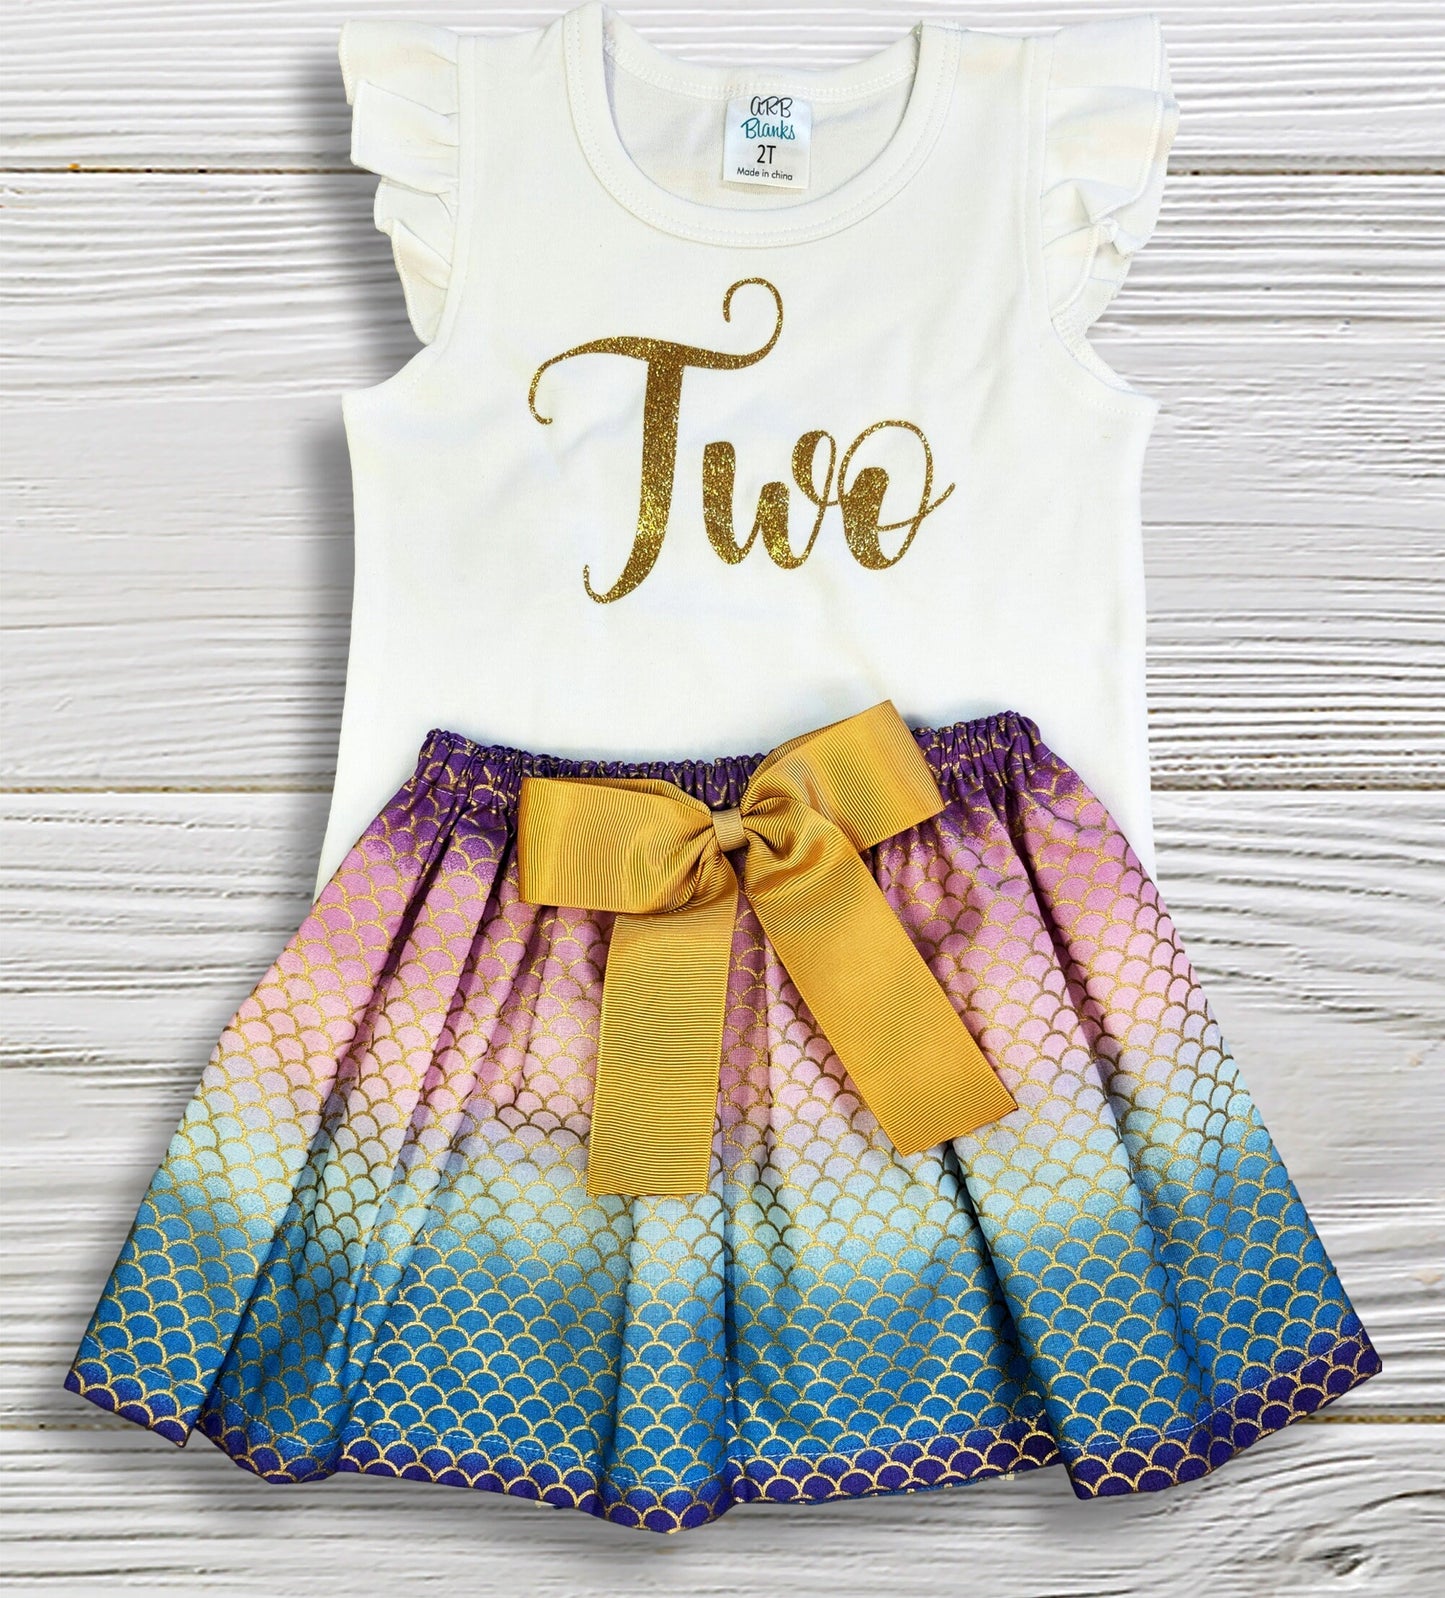 Second birthday girl outfit, Glitter age outfit, Skirt ruffle shirt outfit, Birthday toddler outfit, Skirt Shirt outfit